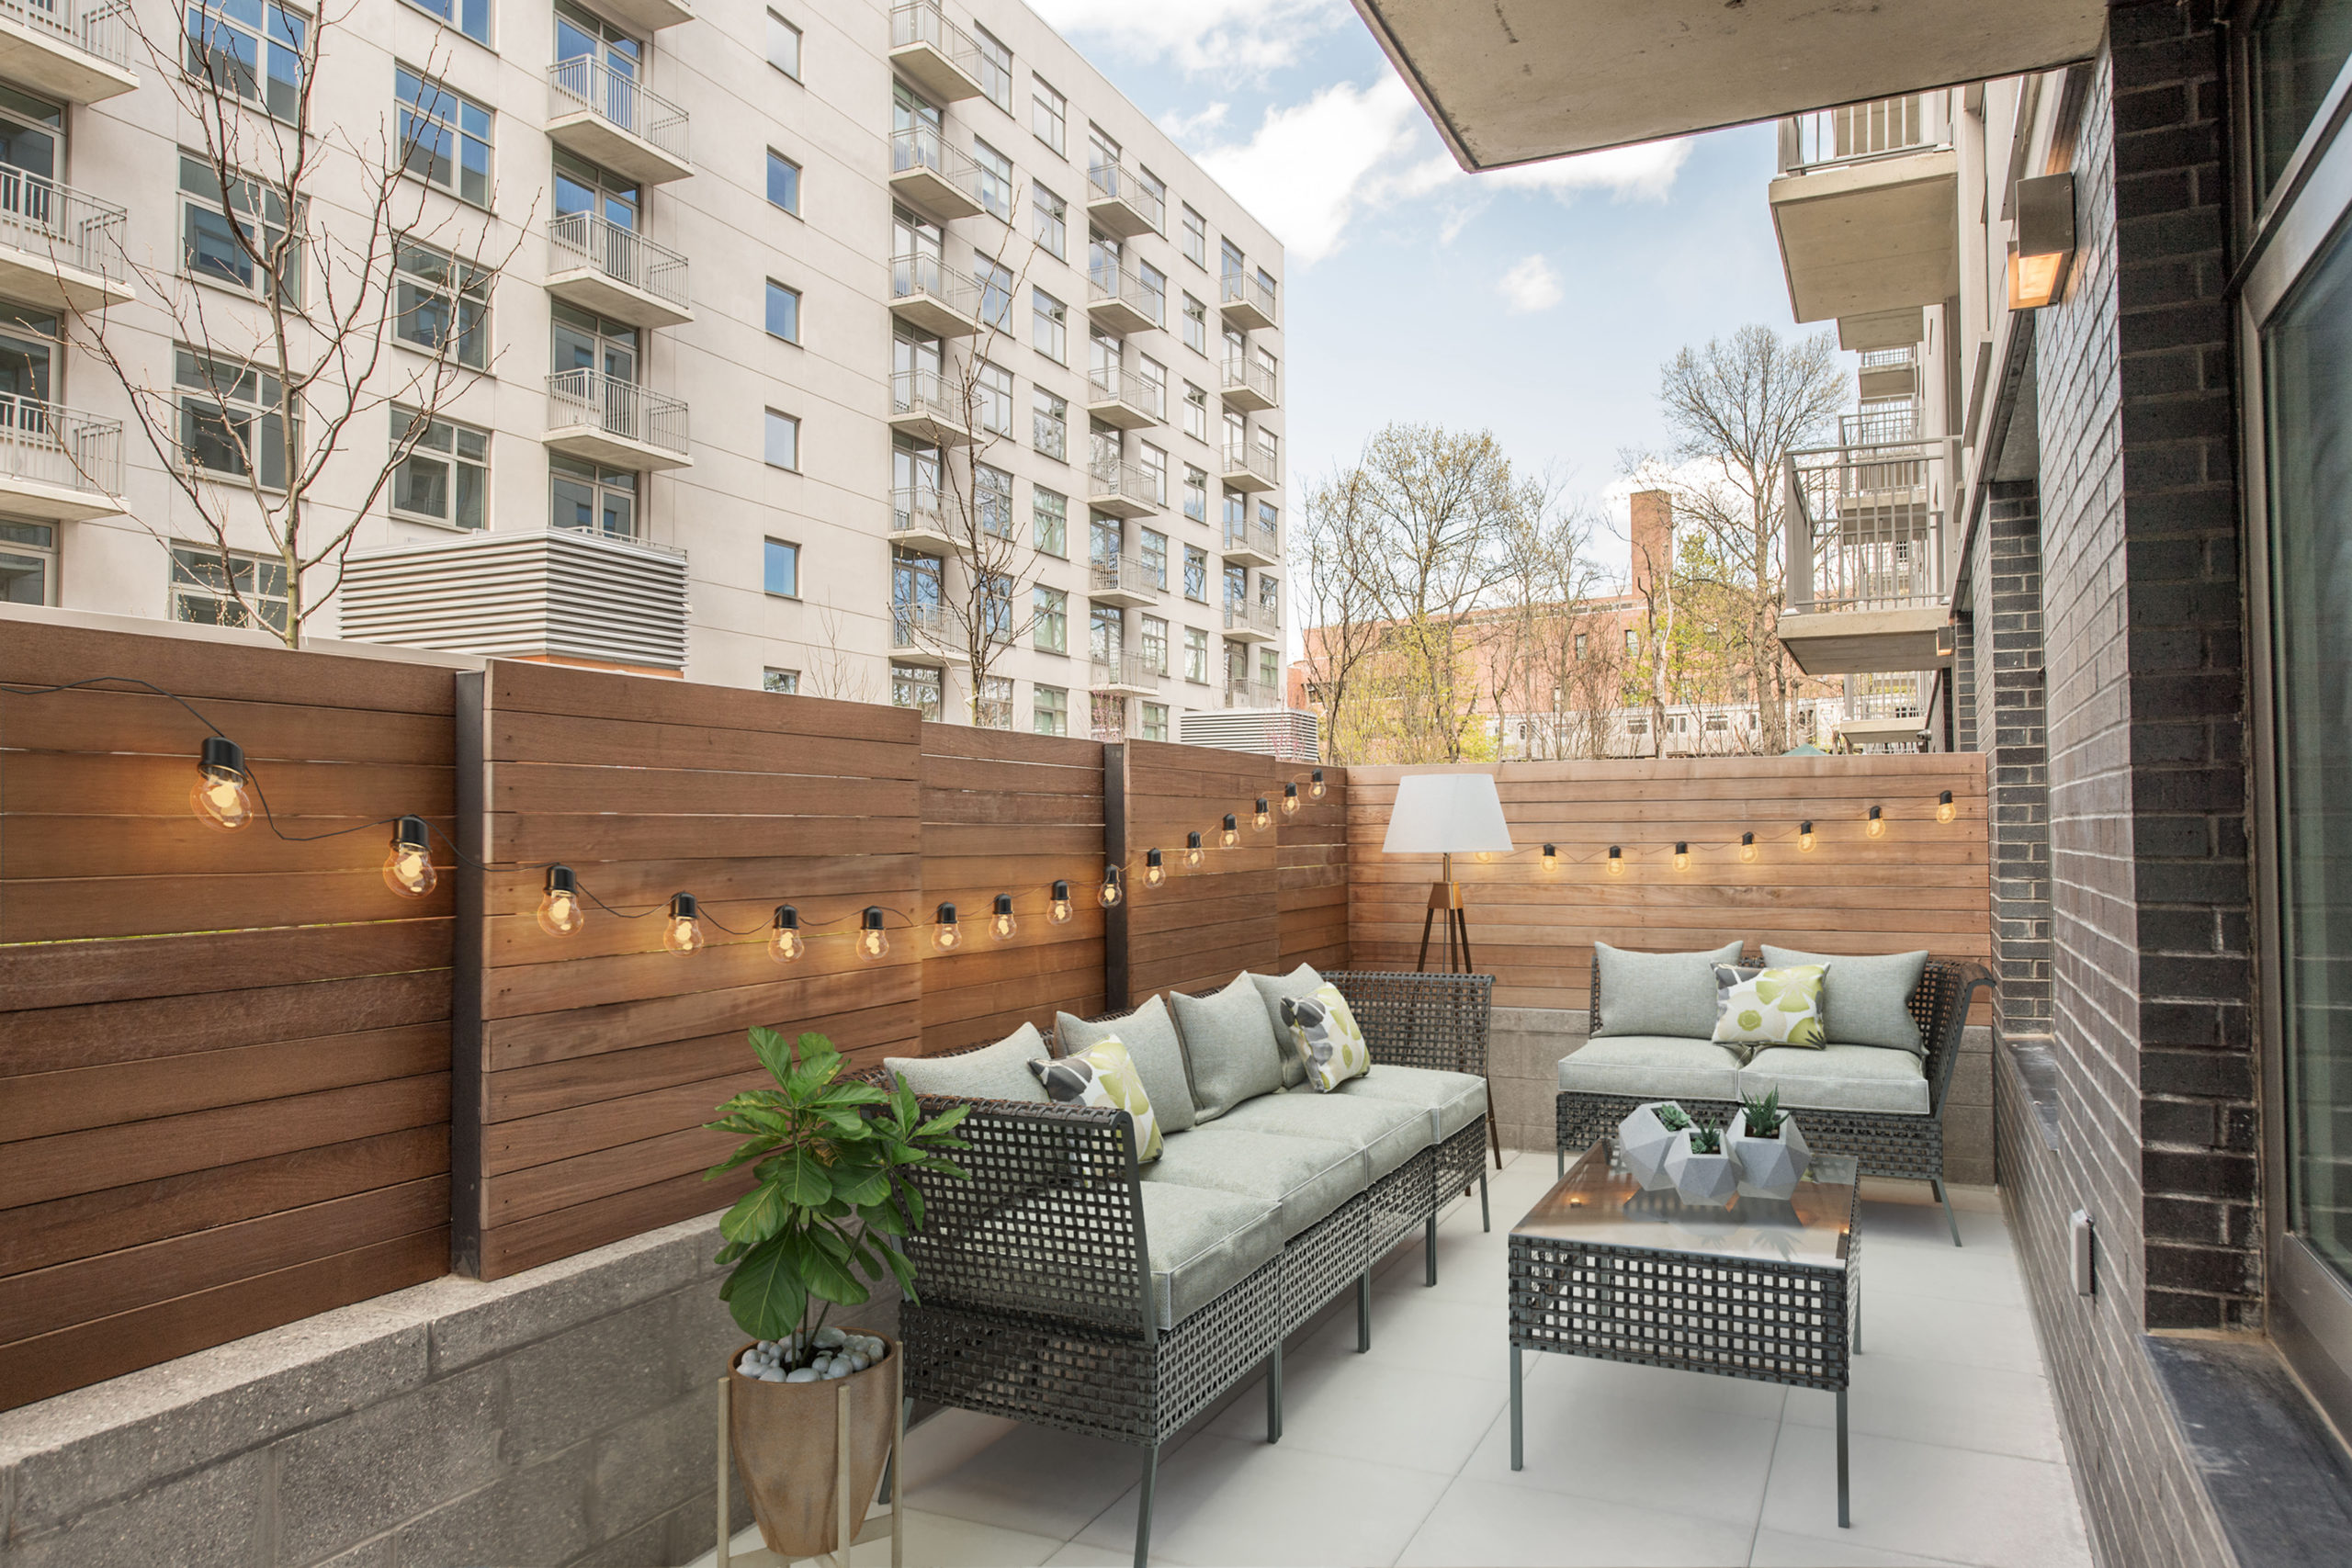 Outdoor patio at The Vitagraph Brooklyn with wicker furniture